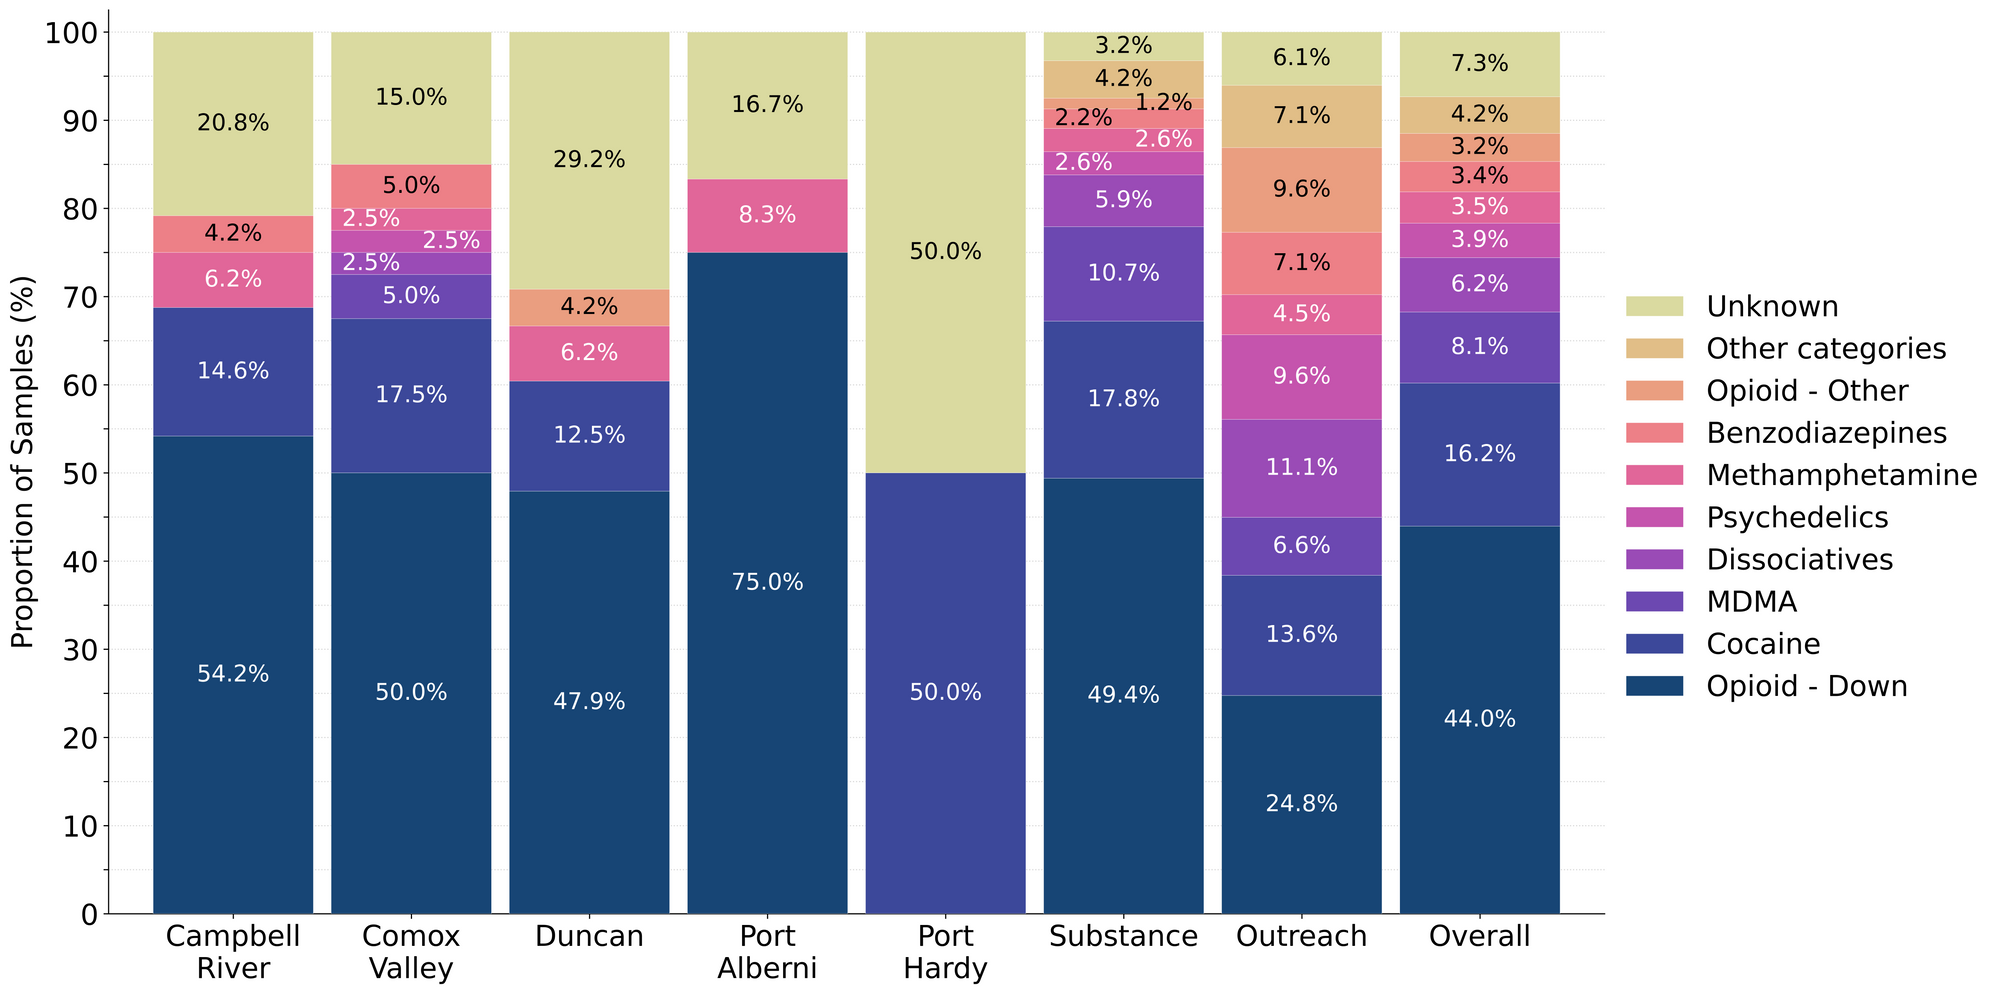 Figure 1. Prevalence of drug classes checked during March split by sample collection/method. Bars are stacked by the percentage of samples in each drug class, with the individual percentages overlaid. Drug classes which represent less than 1% of a given location’s total do not have their percent overlaid onto the bar.